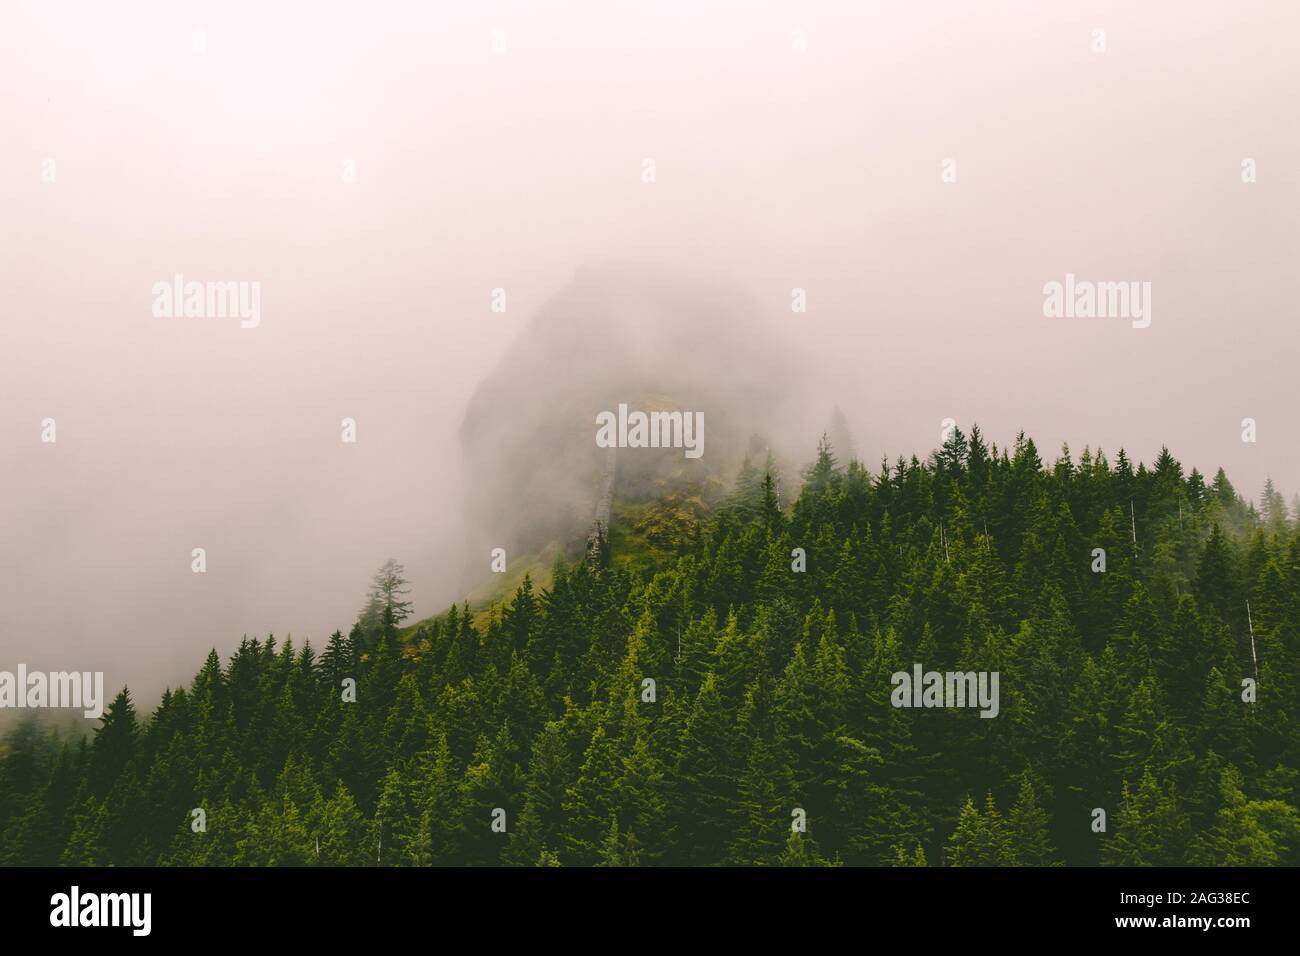 Foggy shot of a green forest with smoke coming out of the trees Stock Photo